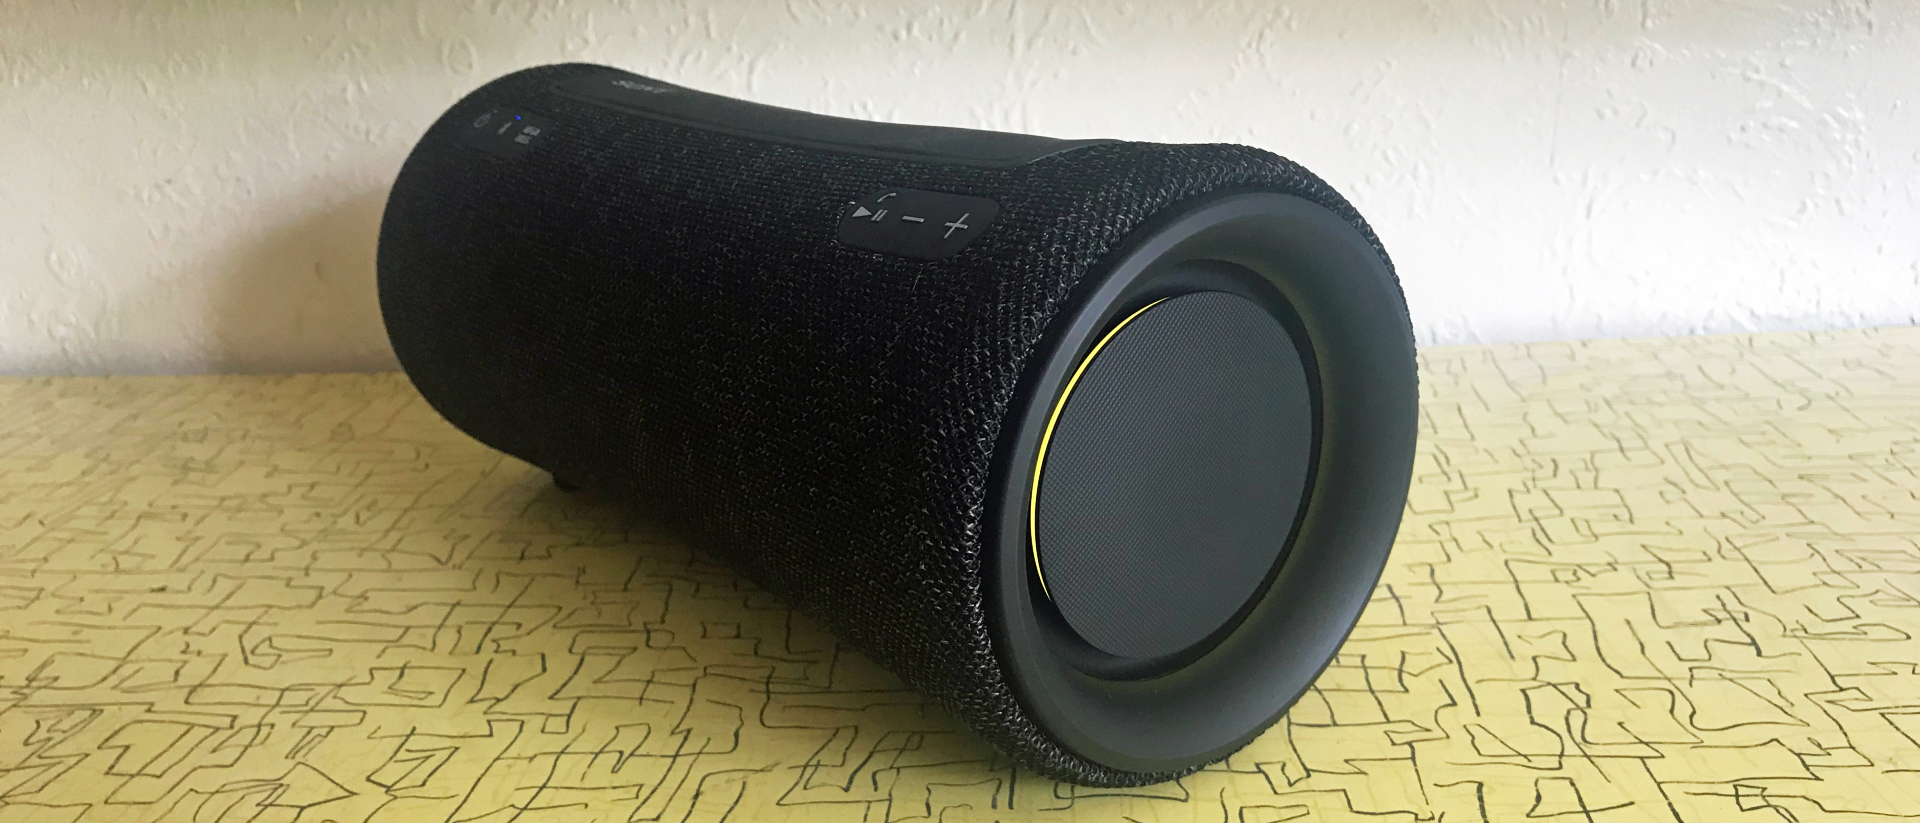 Sony XG300 review: a pricey Bluetooth speaker, but so worth it